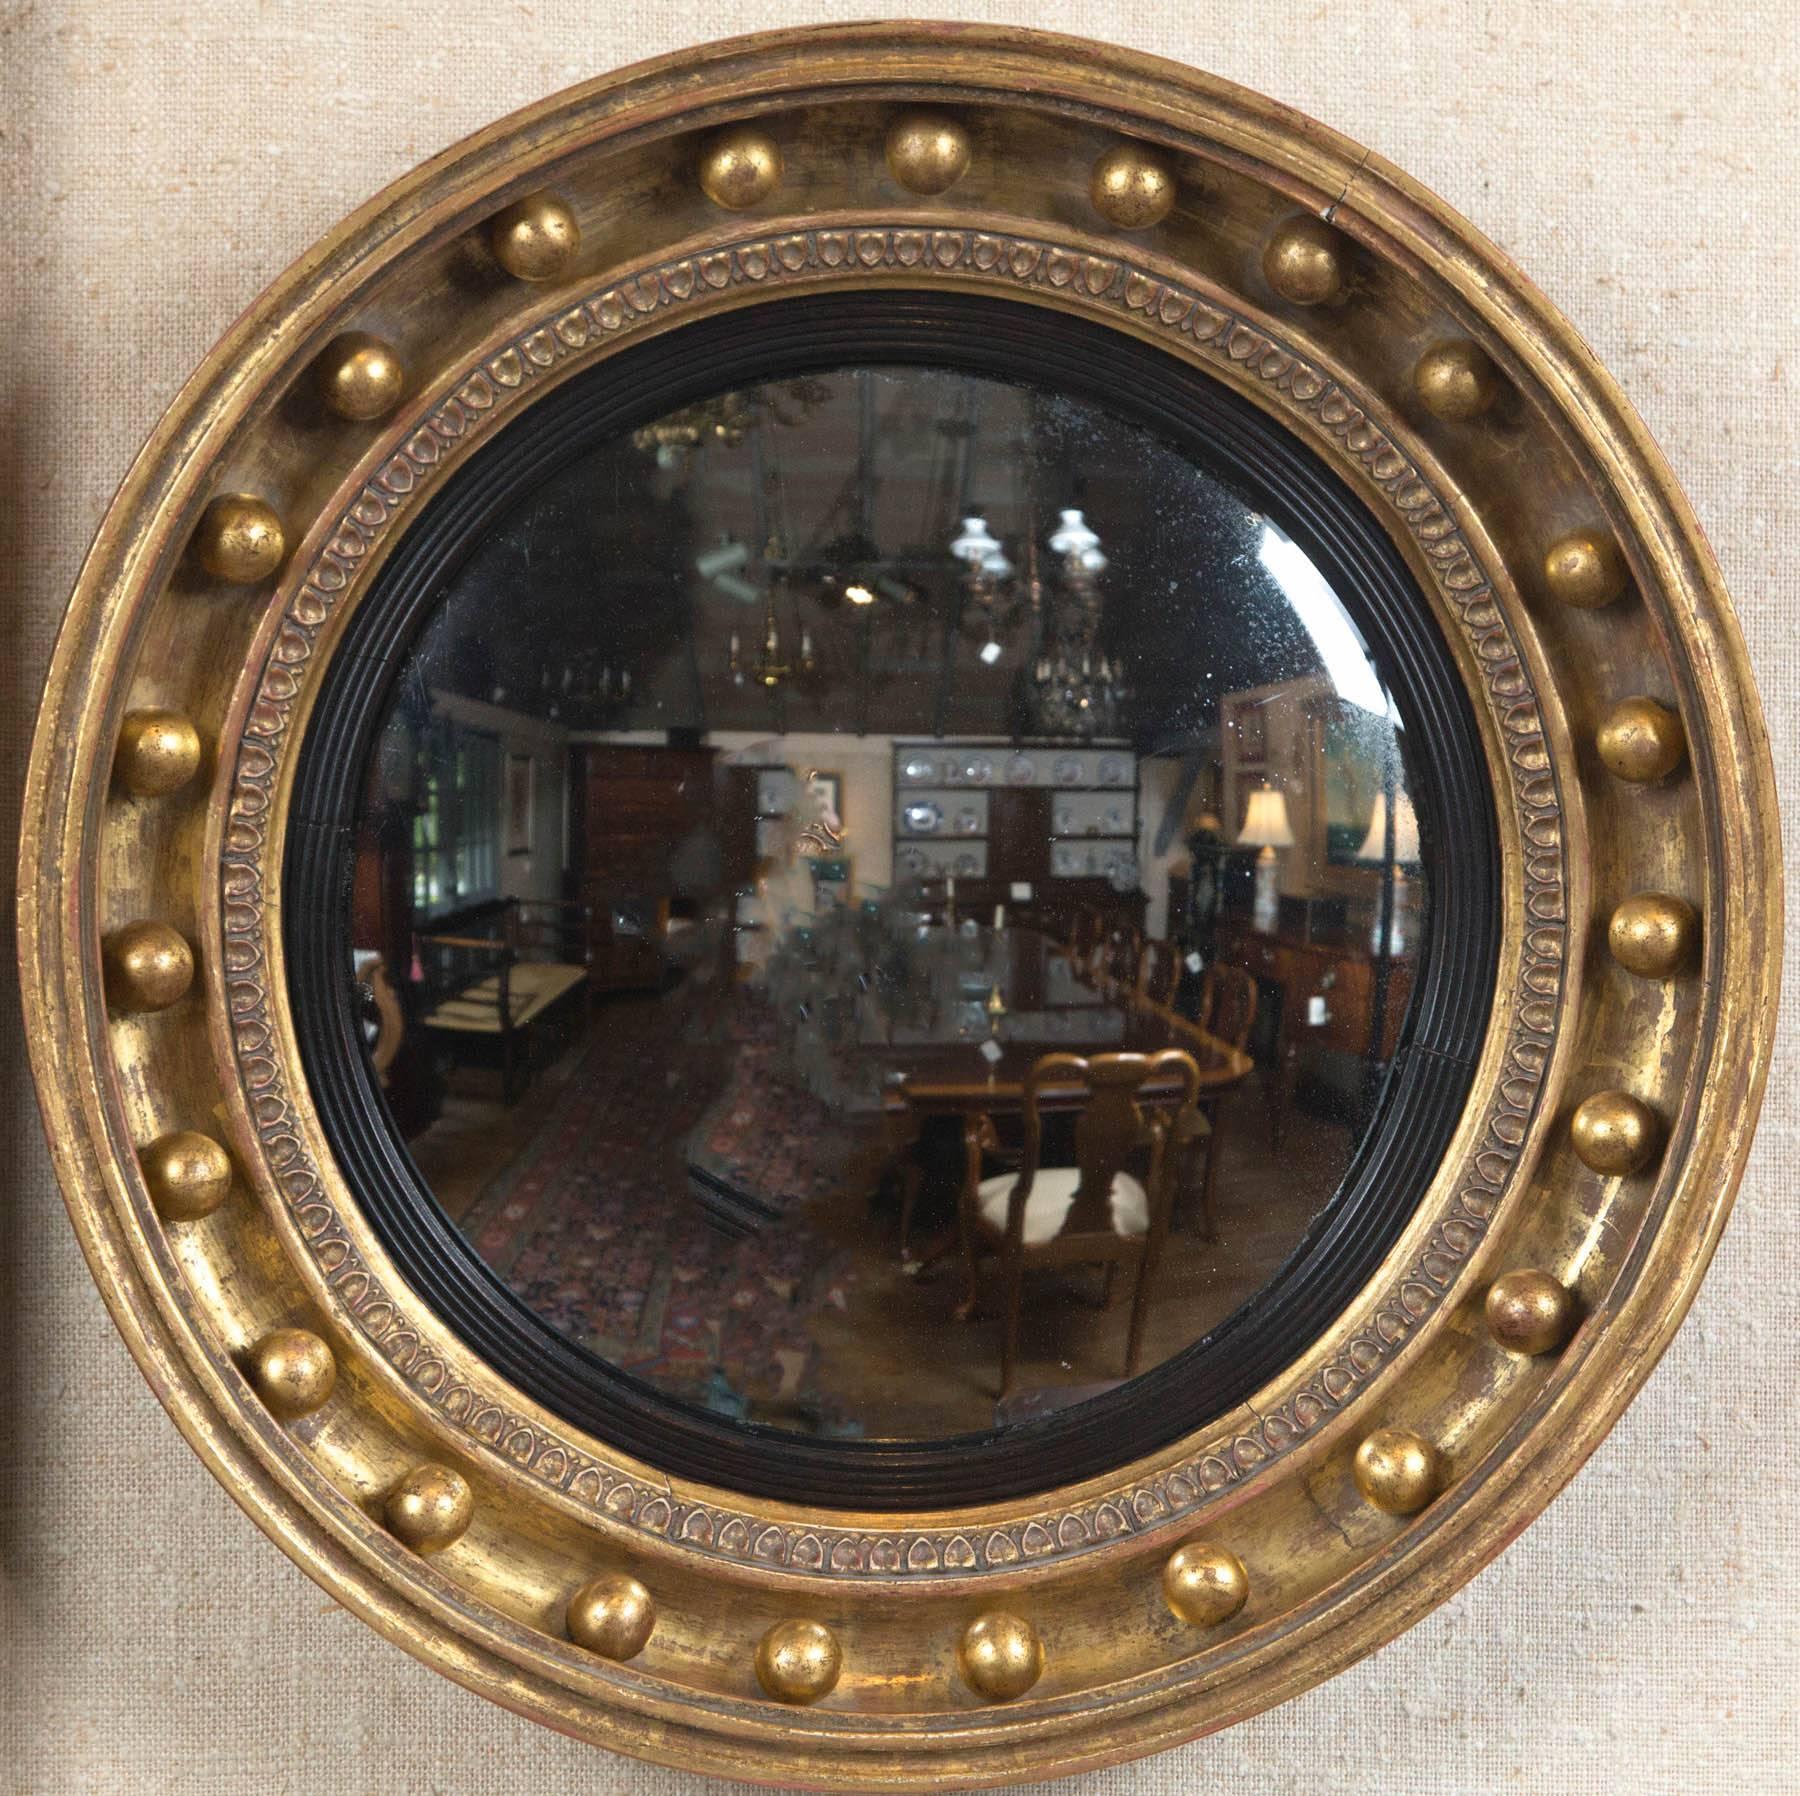 Fine example of a petite Regency convex giltwood mirror with egg and dart surround and ebonized slip. Original glass.